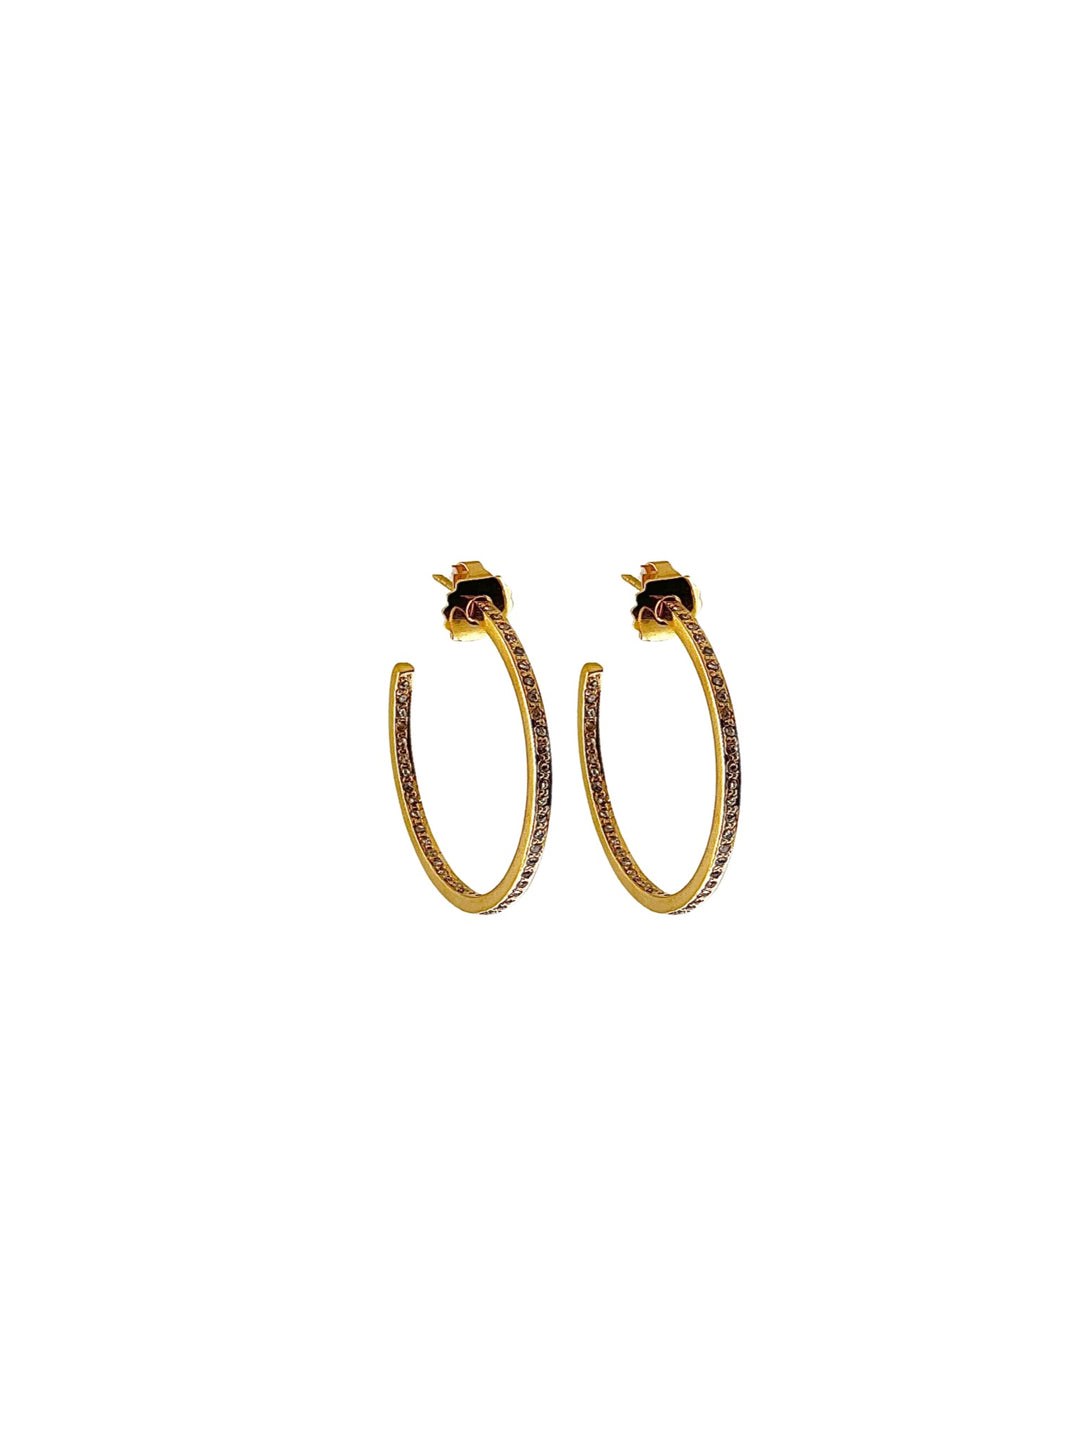 The Woods Fine Jewelry Small Gold Pave Hoops